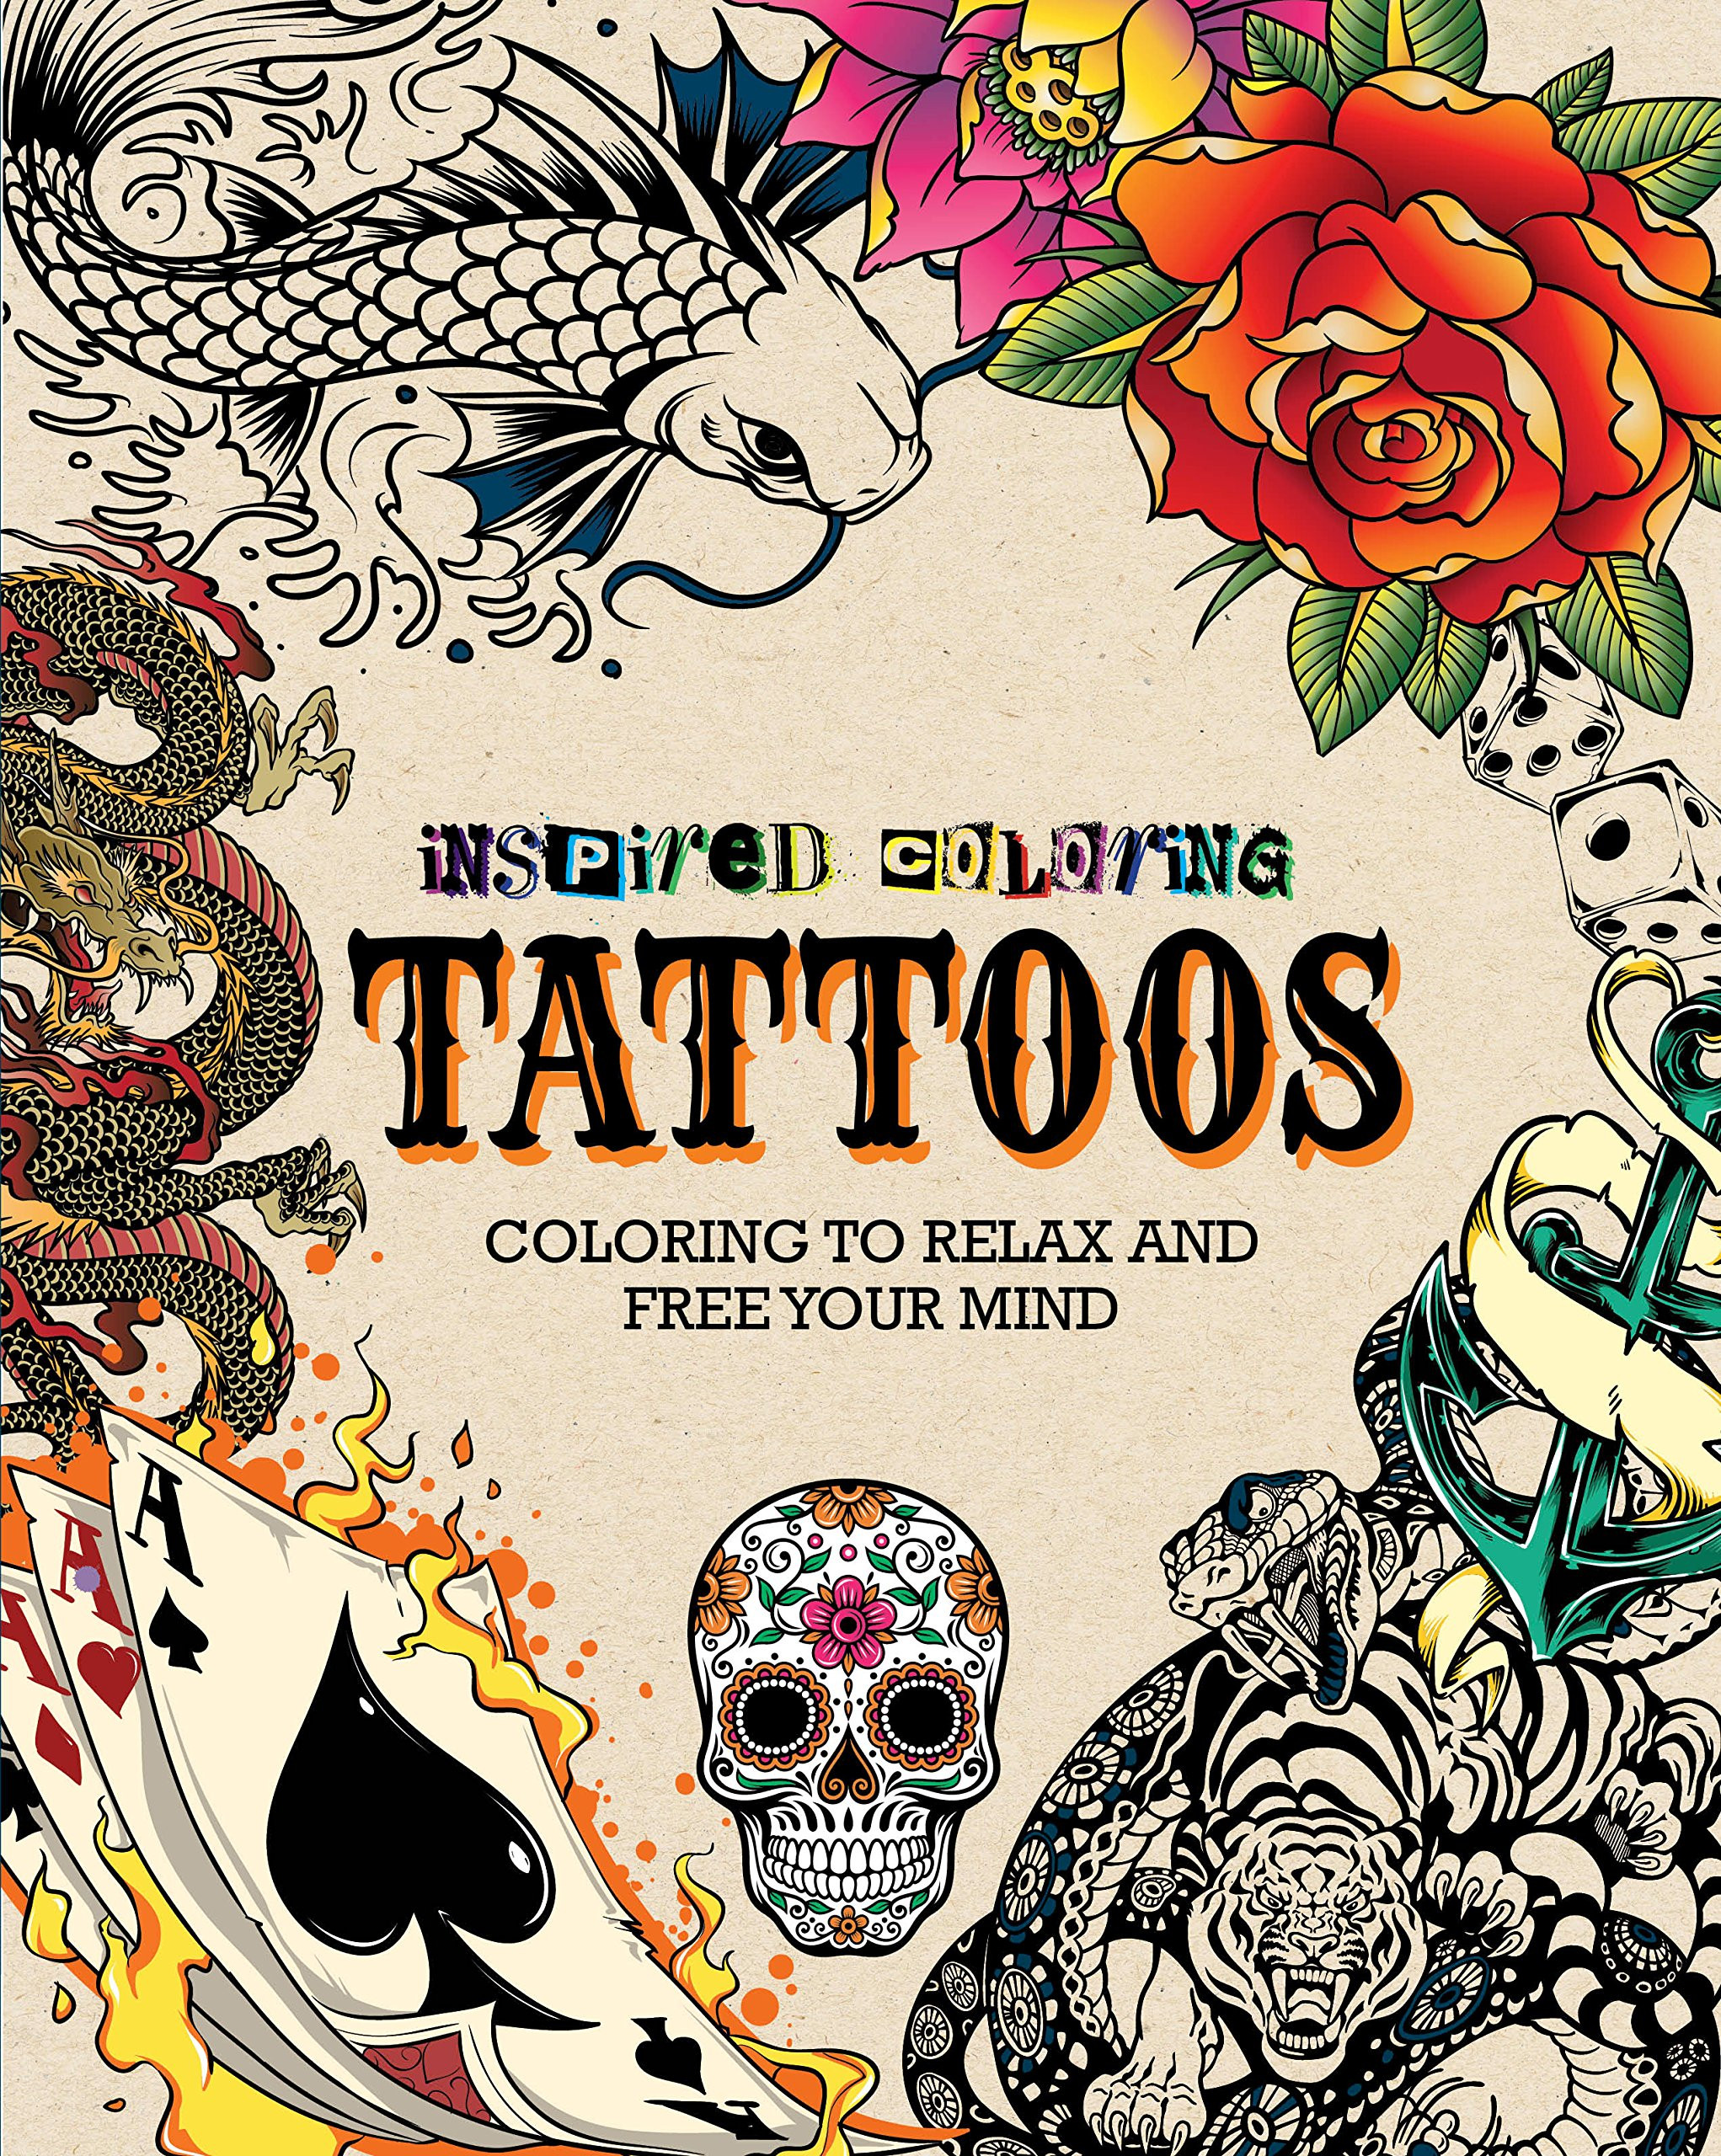 Best Coloring Books For Adults
 The 21 Best Adult Coloring Books You Can Buy